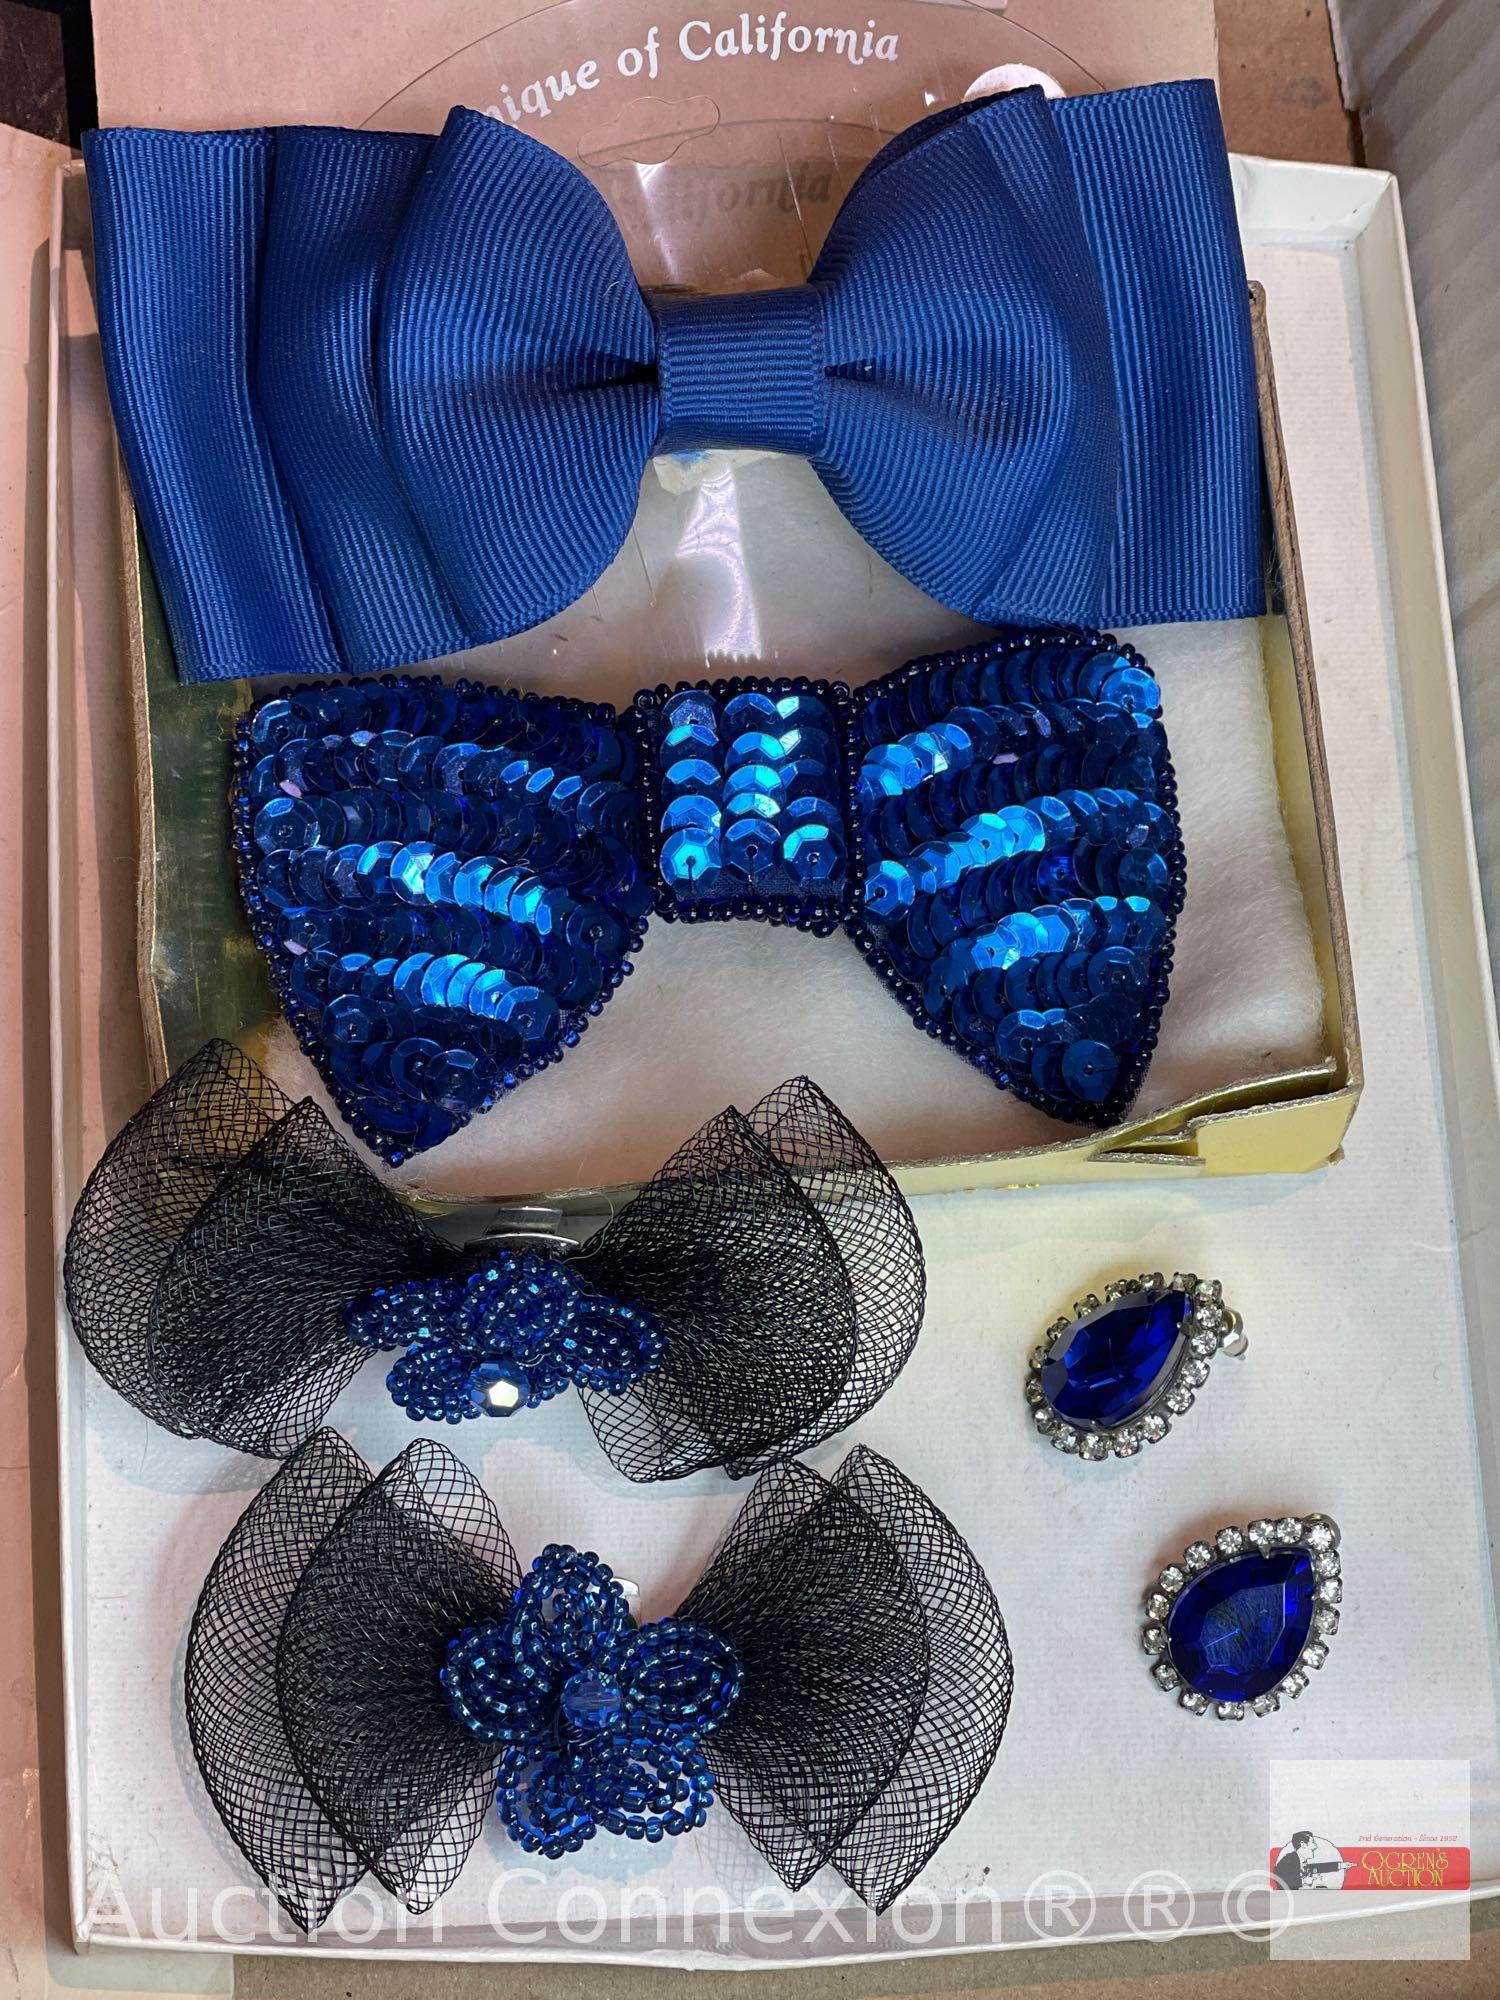 Jewelry - Button covers, hair clips, shoe clips and pr. rhinestone earrings